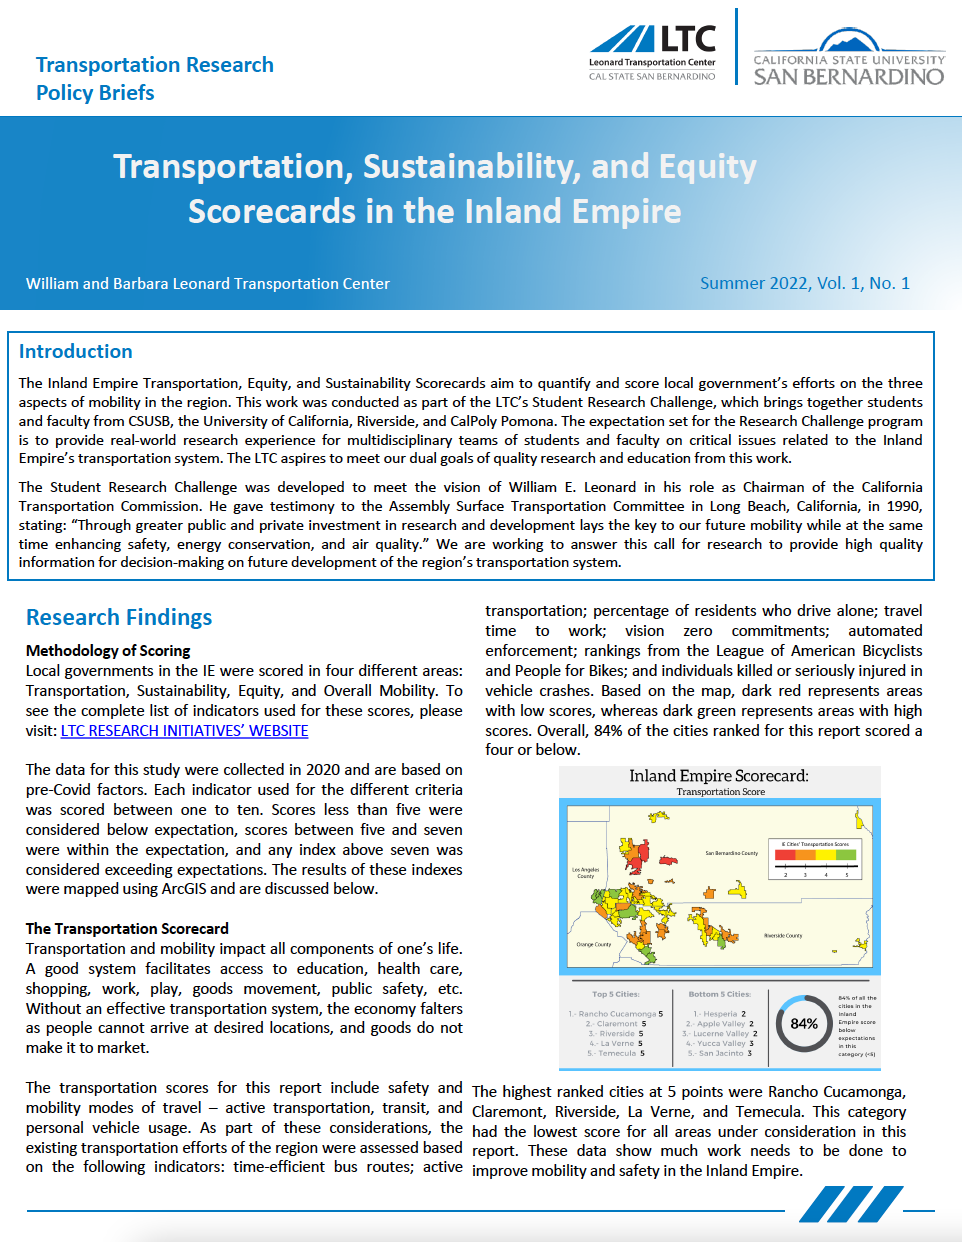 Transportation, Sustainability, and Equity Scorecards in the Inland Empire